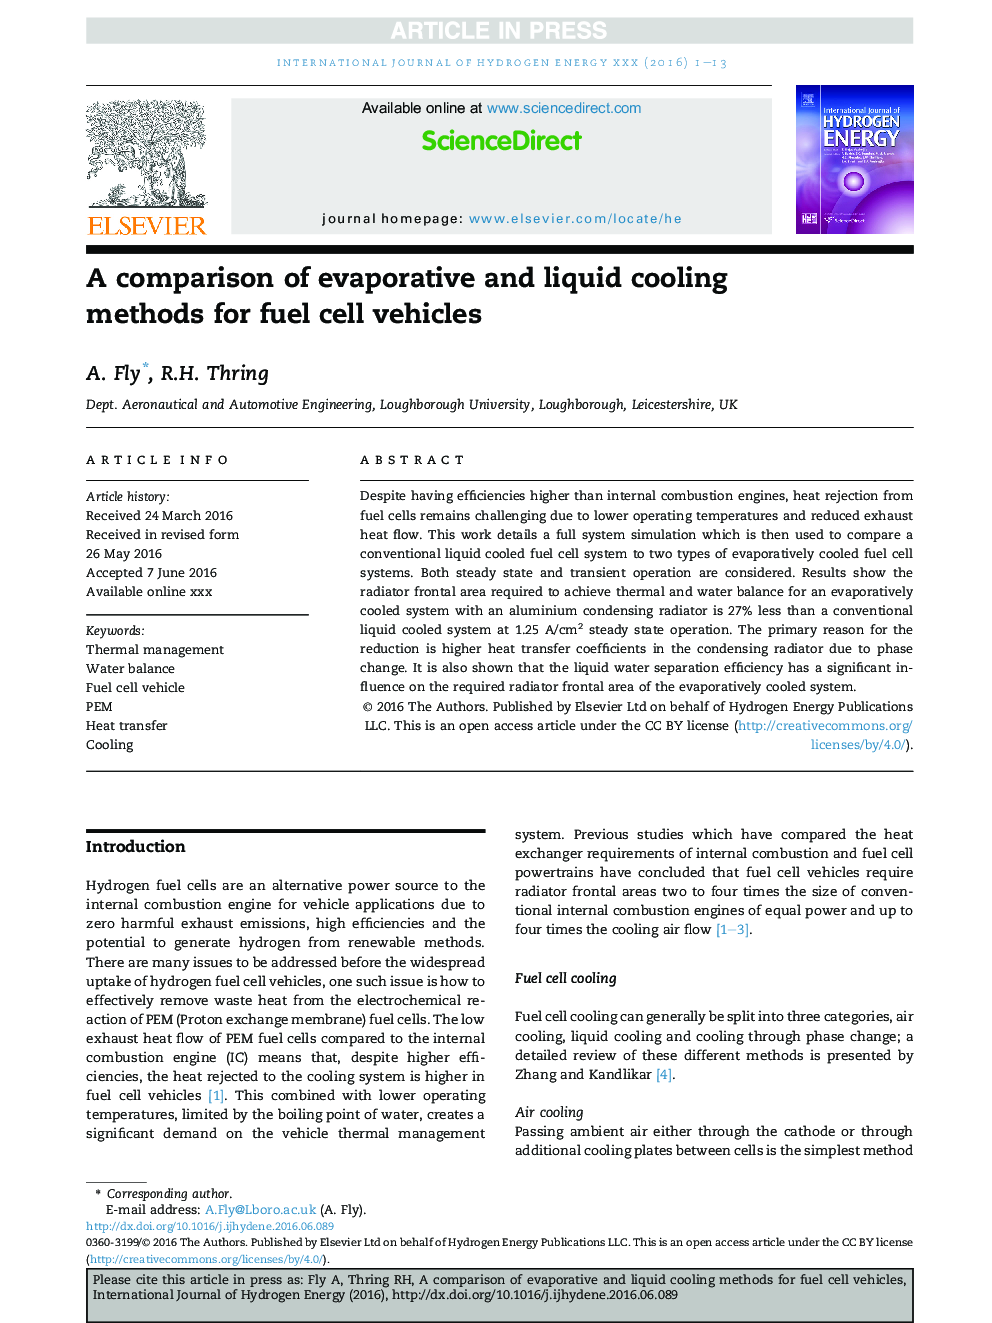 A comparison of evaporative and liquid cooling methods for fuel cell vehicles